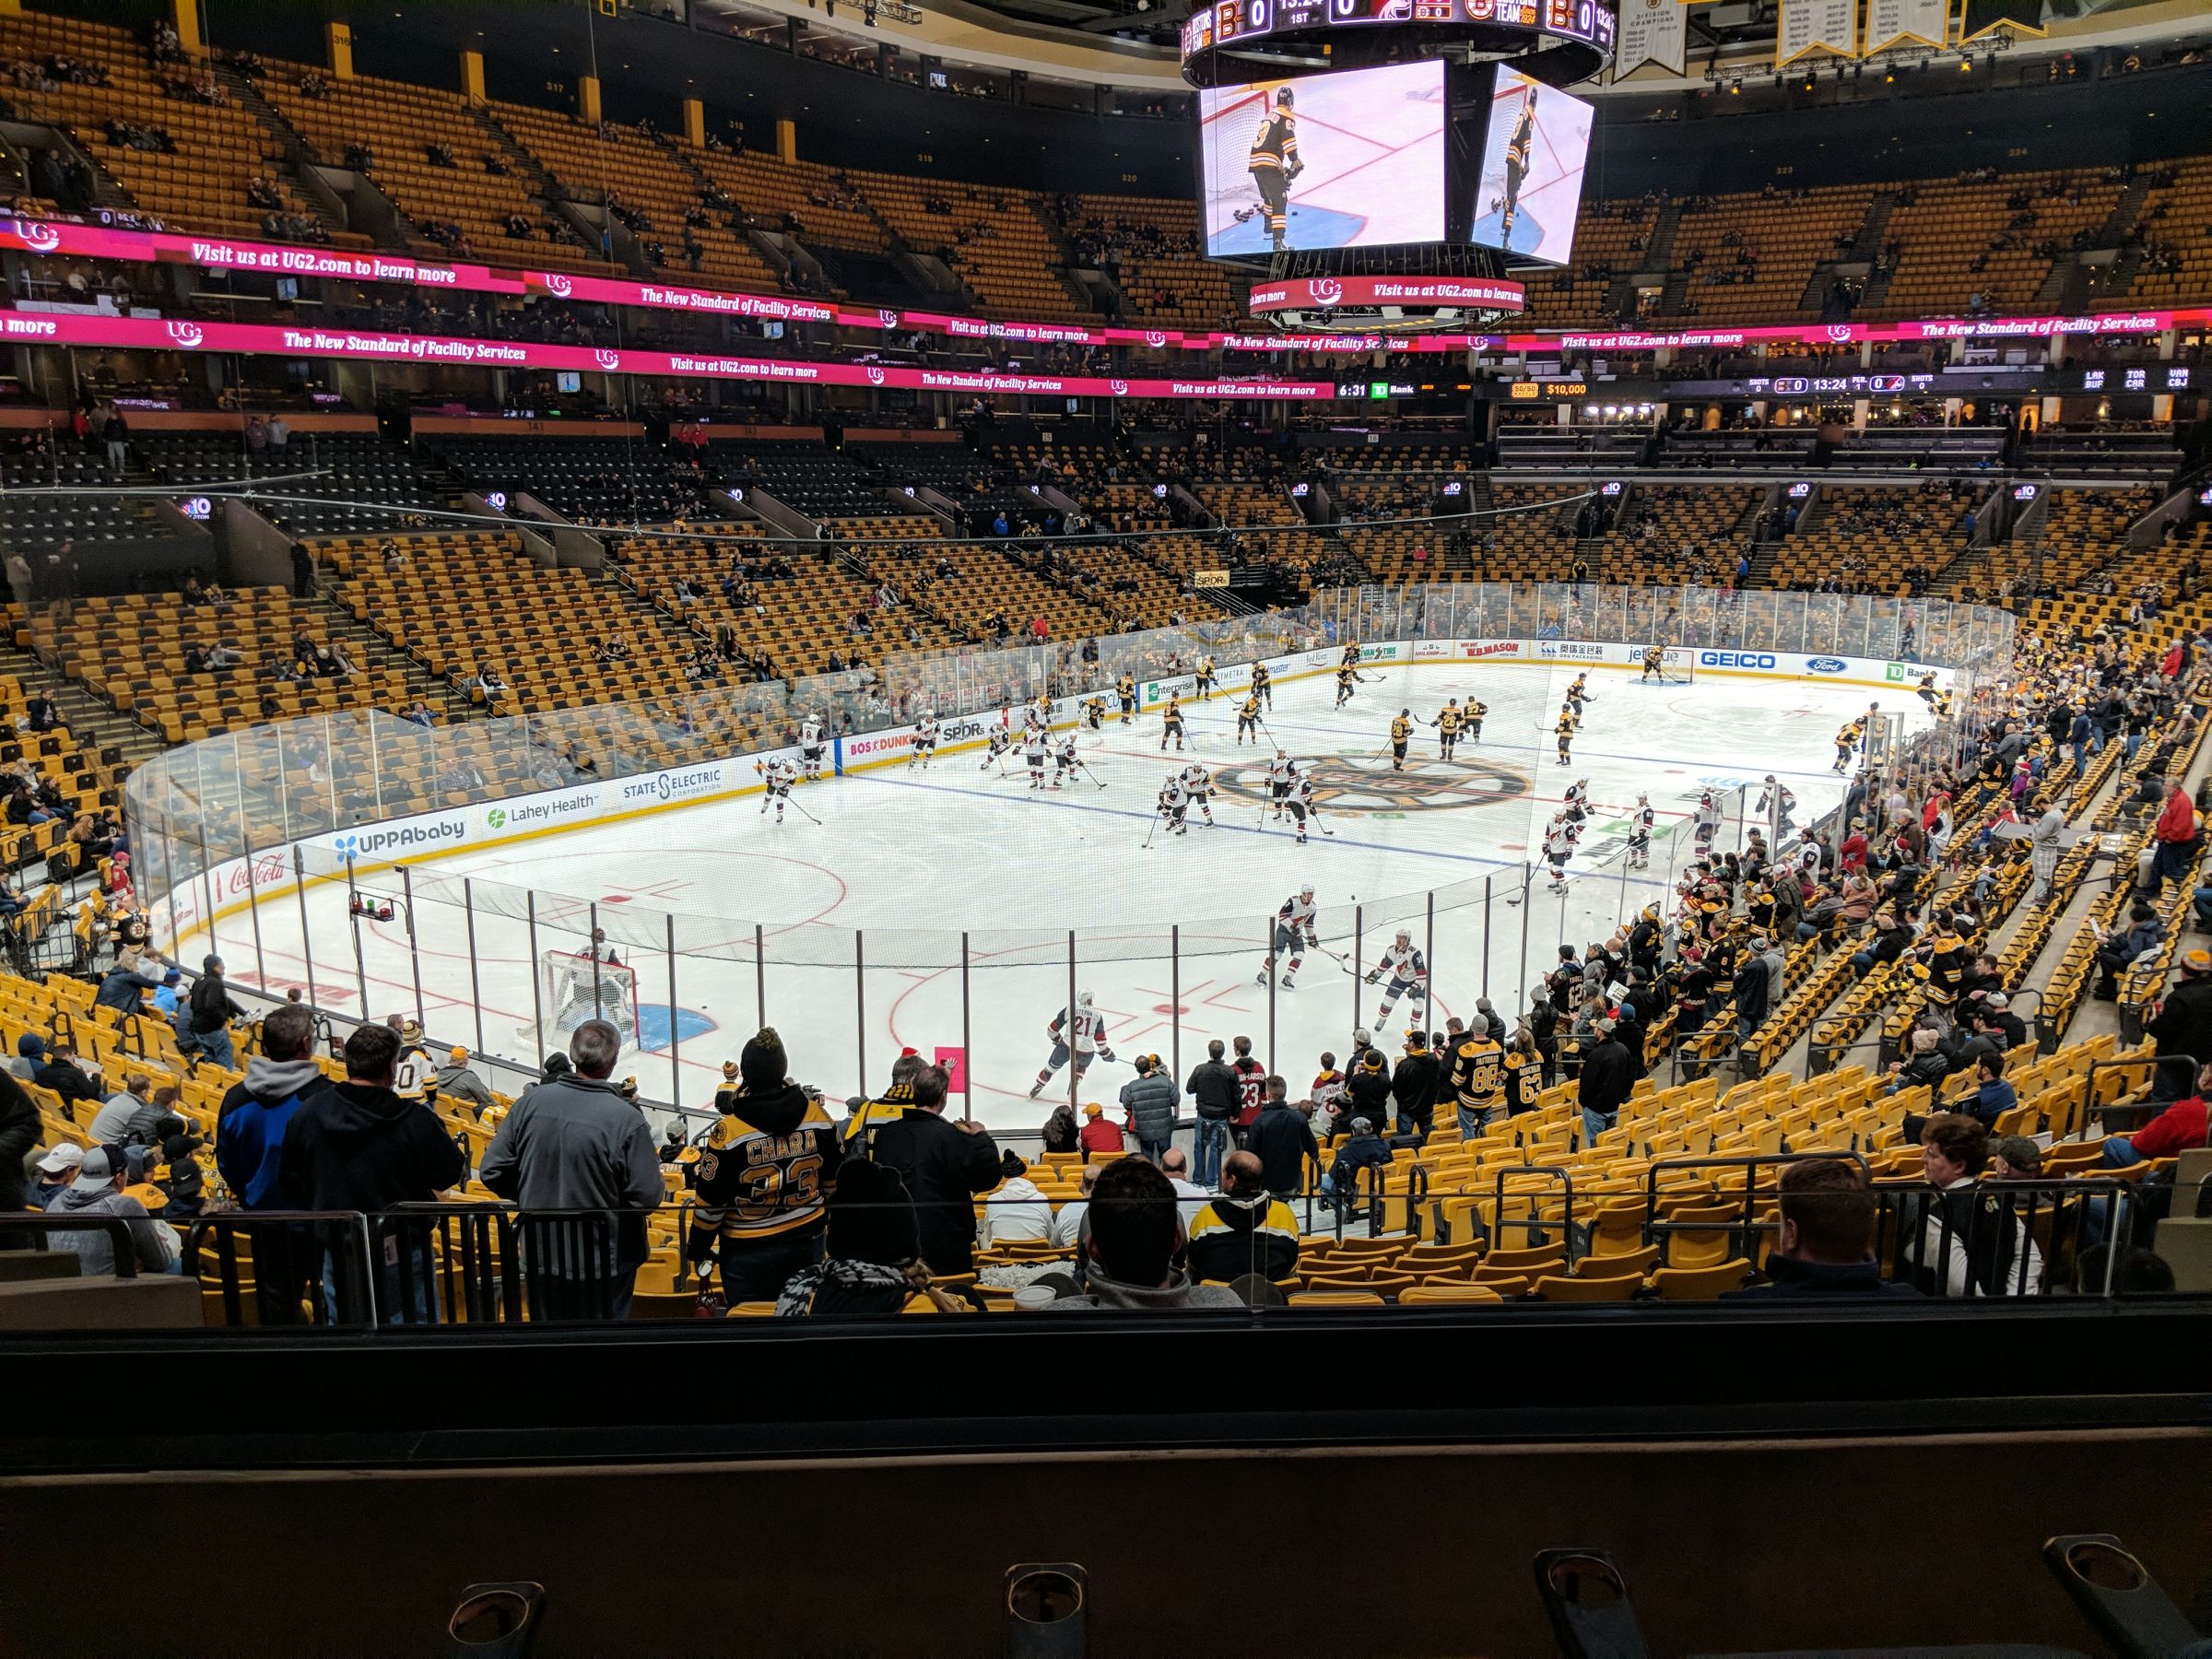 loge 5, row 24 seat view  for hockey - td garden